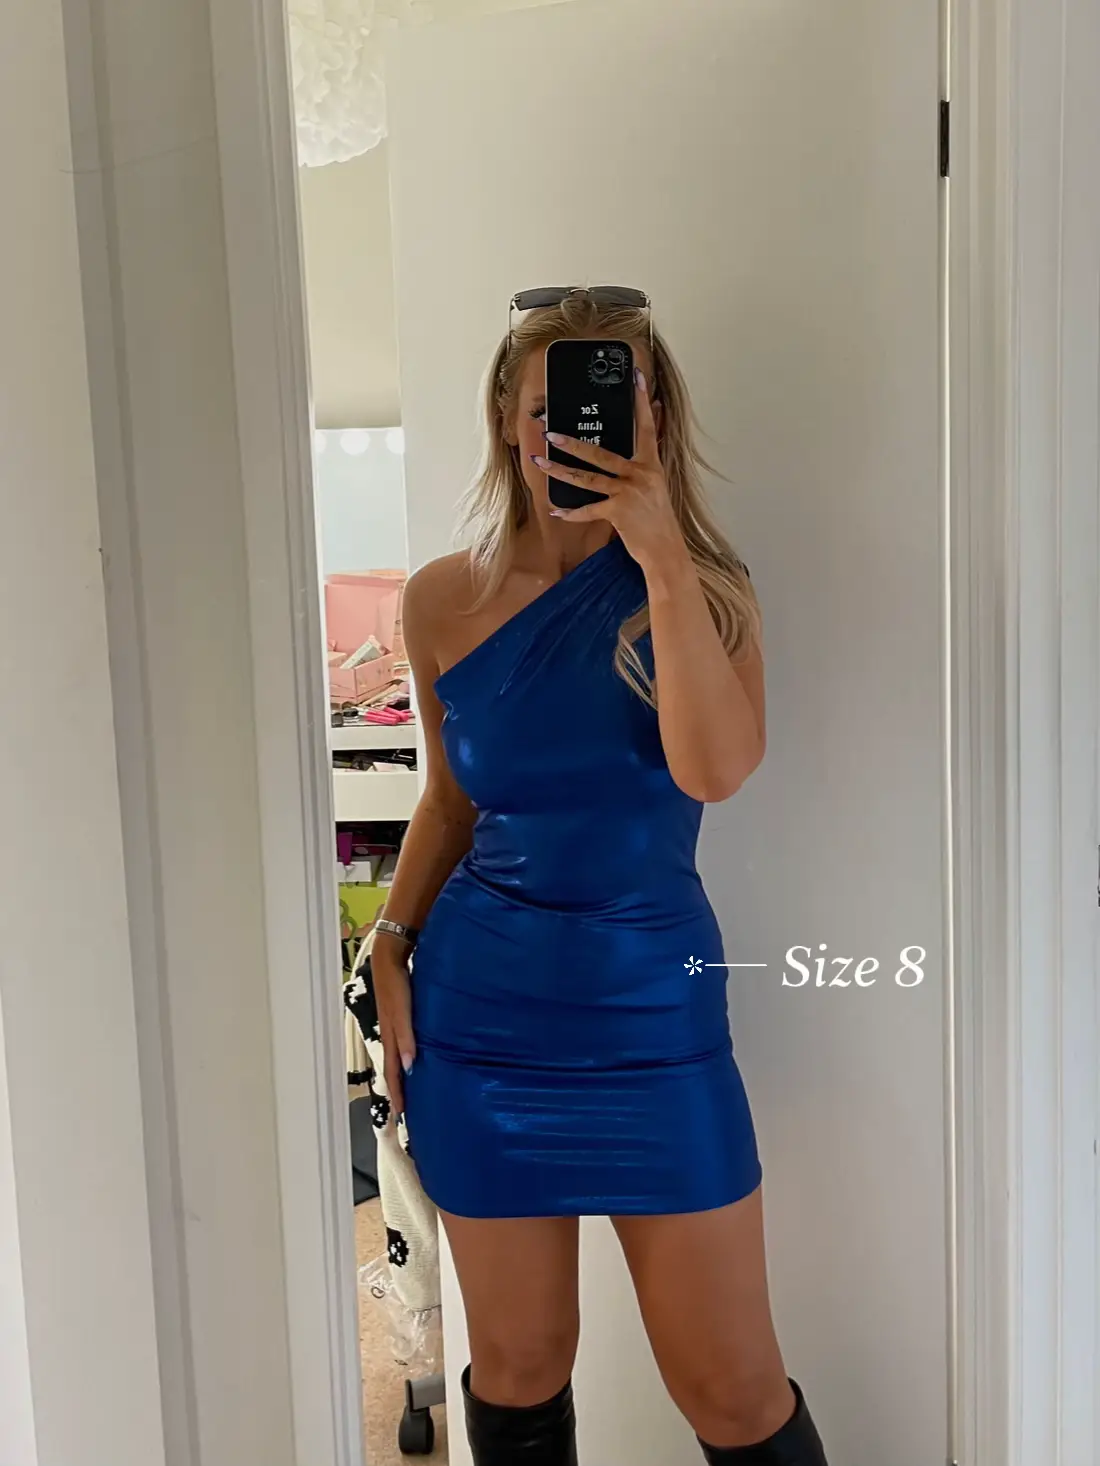 SIZE 0 vs SIZE 8 TRY THE SAME OUTFITS FROM PRETTYLITTLETHING